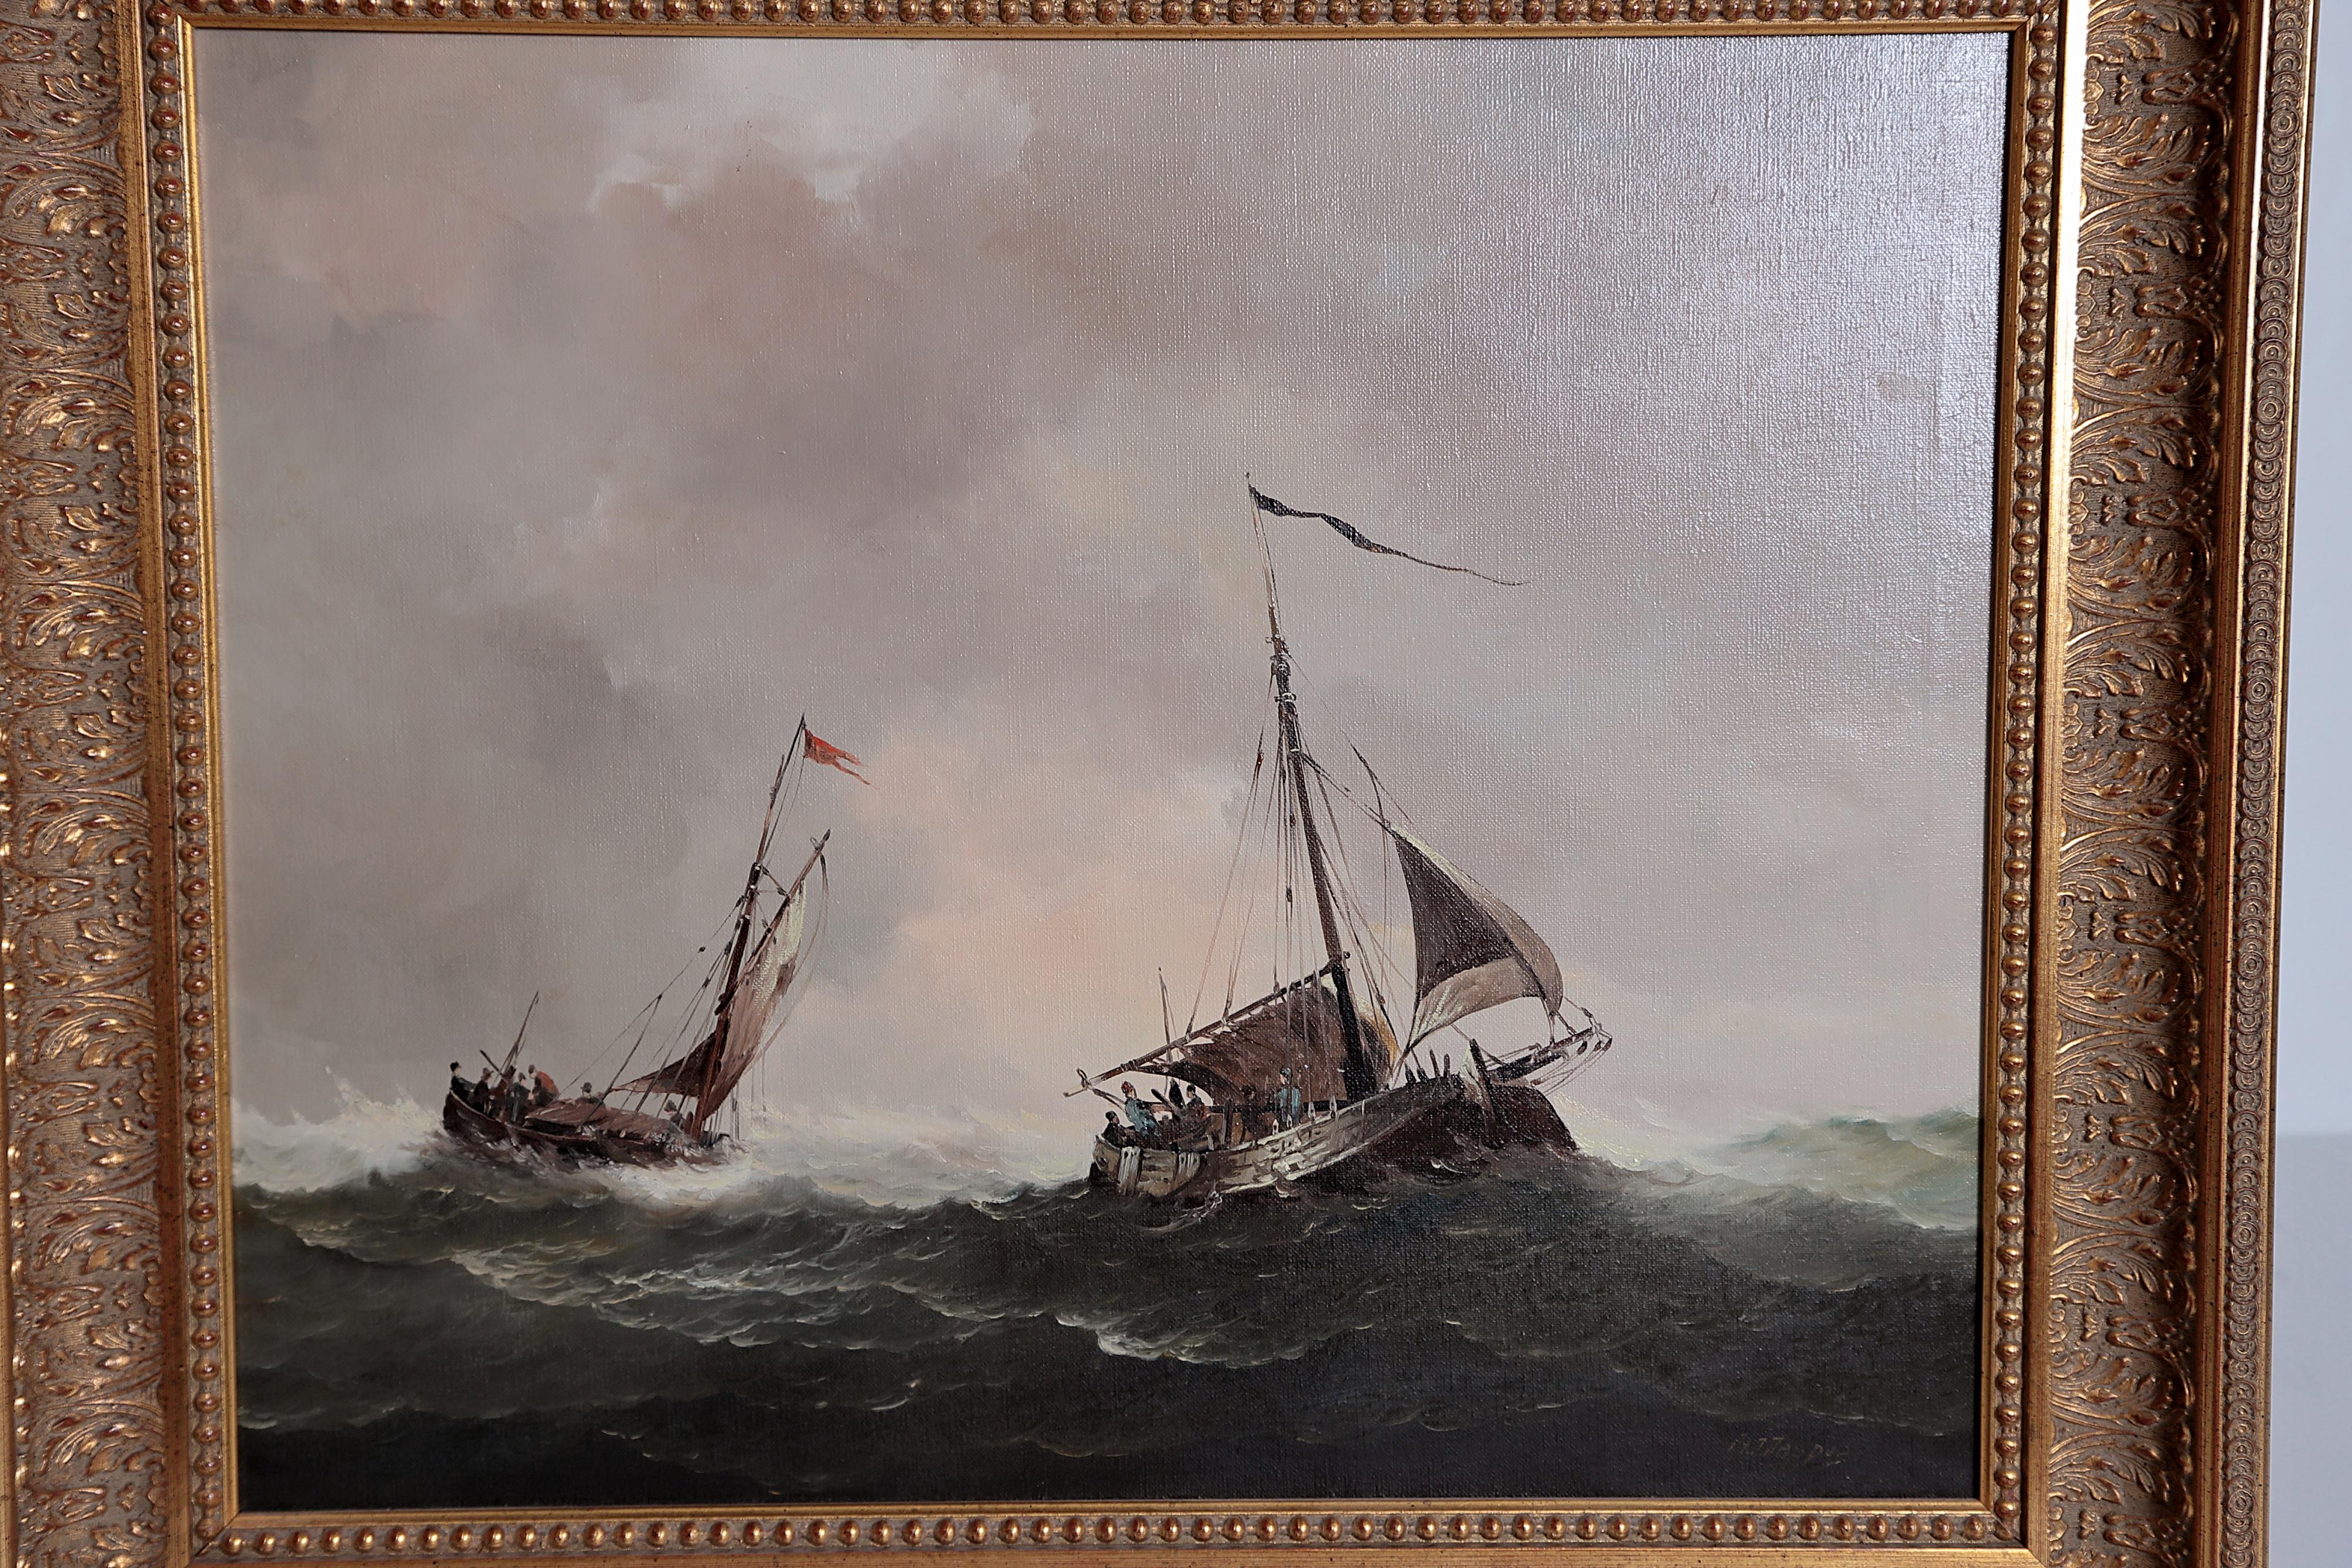 A nautical / maritime oil on canvas, framed, two vessels on a rough, choppy sea with grey storm clouds in the sky overhead, signed lower right, H. J. JASPER (Dutch artist Jan Hendrik Jacob Jasper 1937- 2018)

19